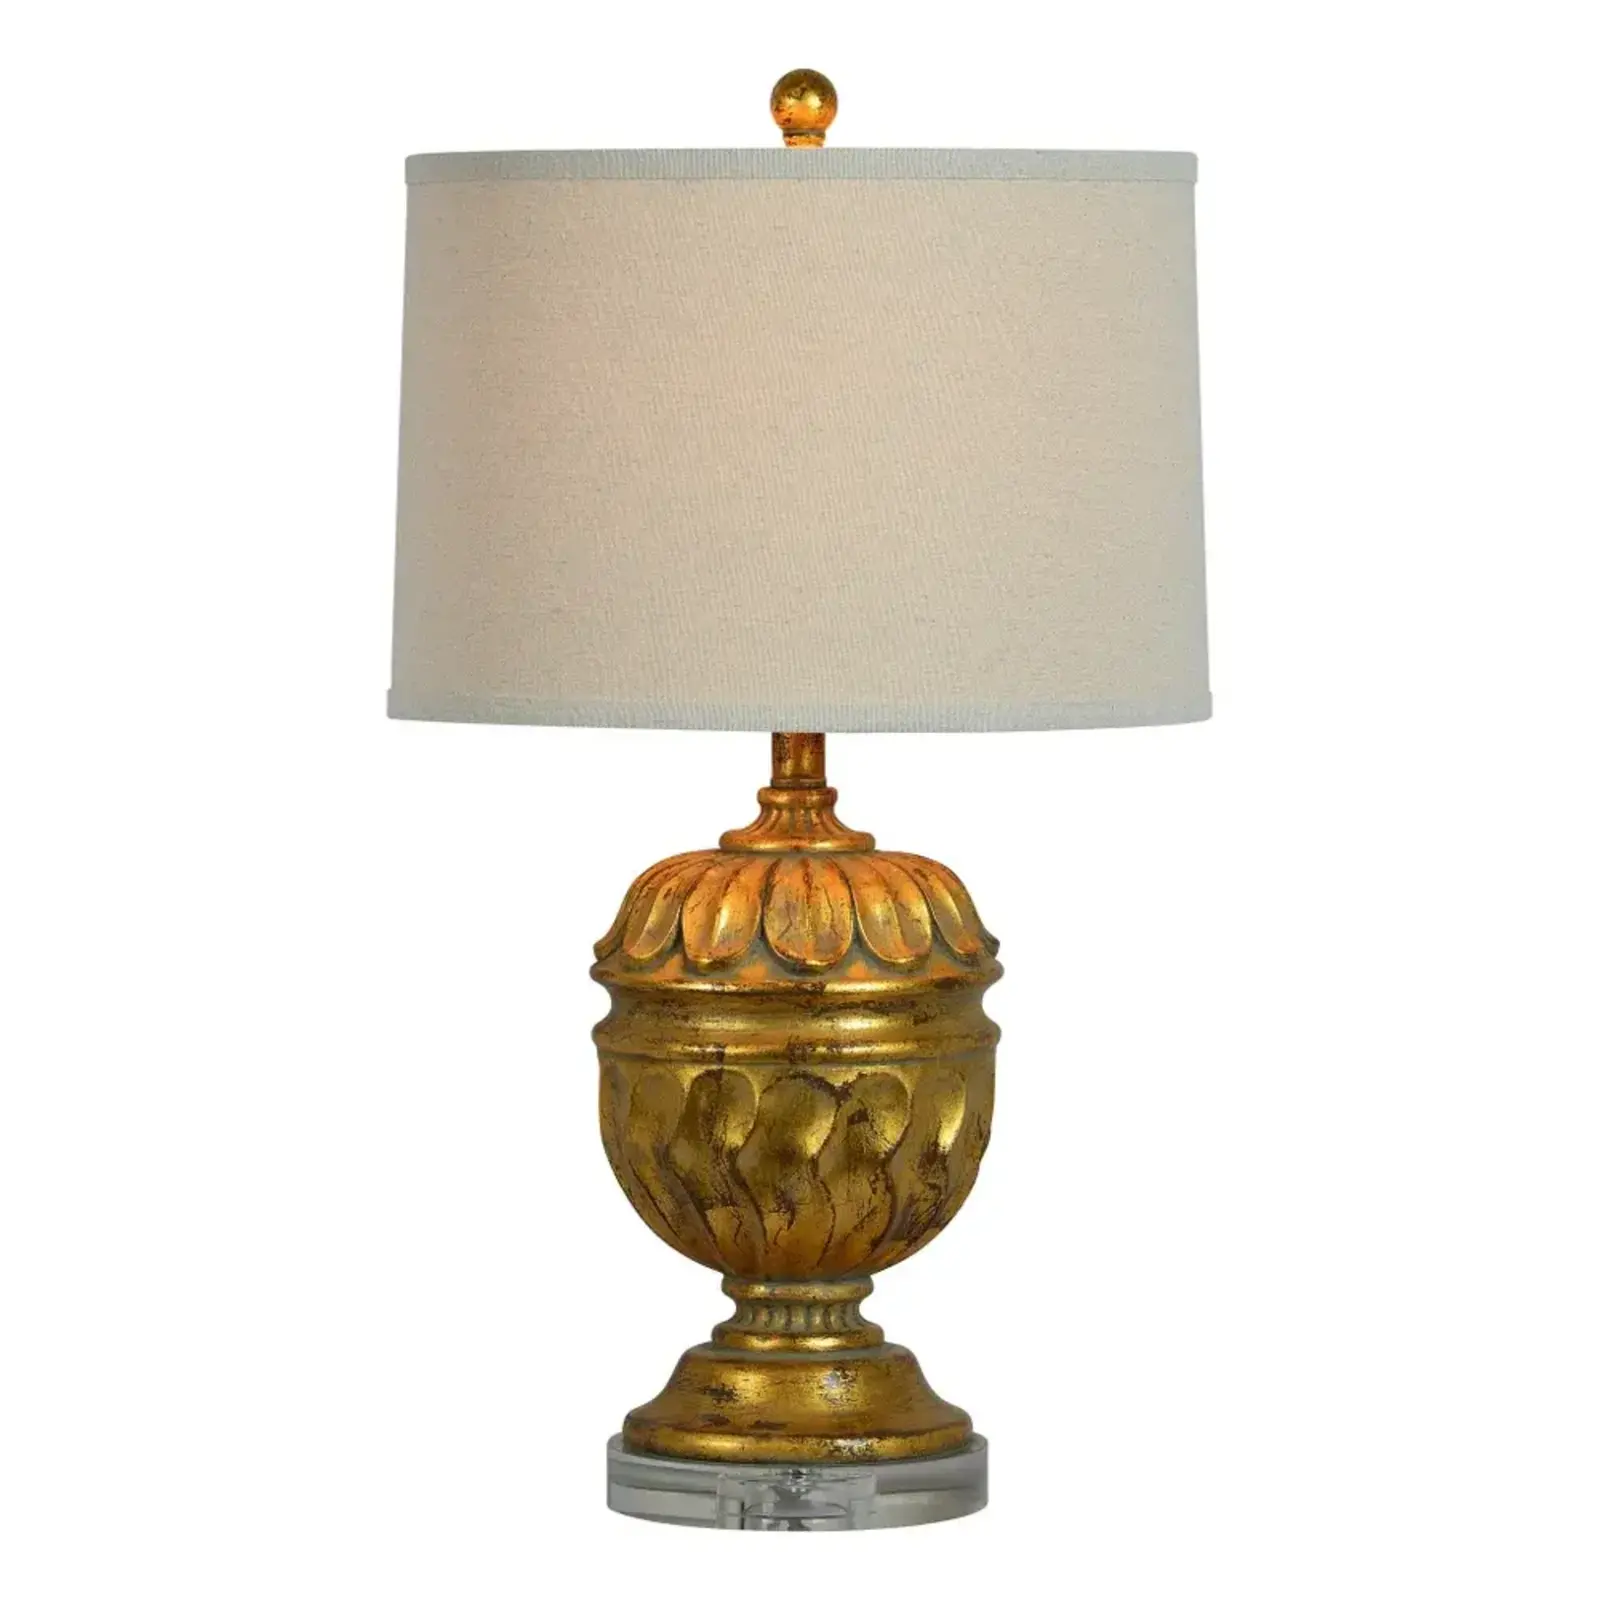 Forty West ROLAND TABLE LAMP  70931 loading=